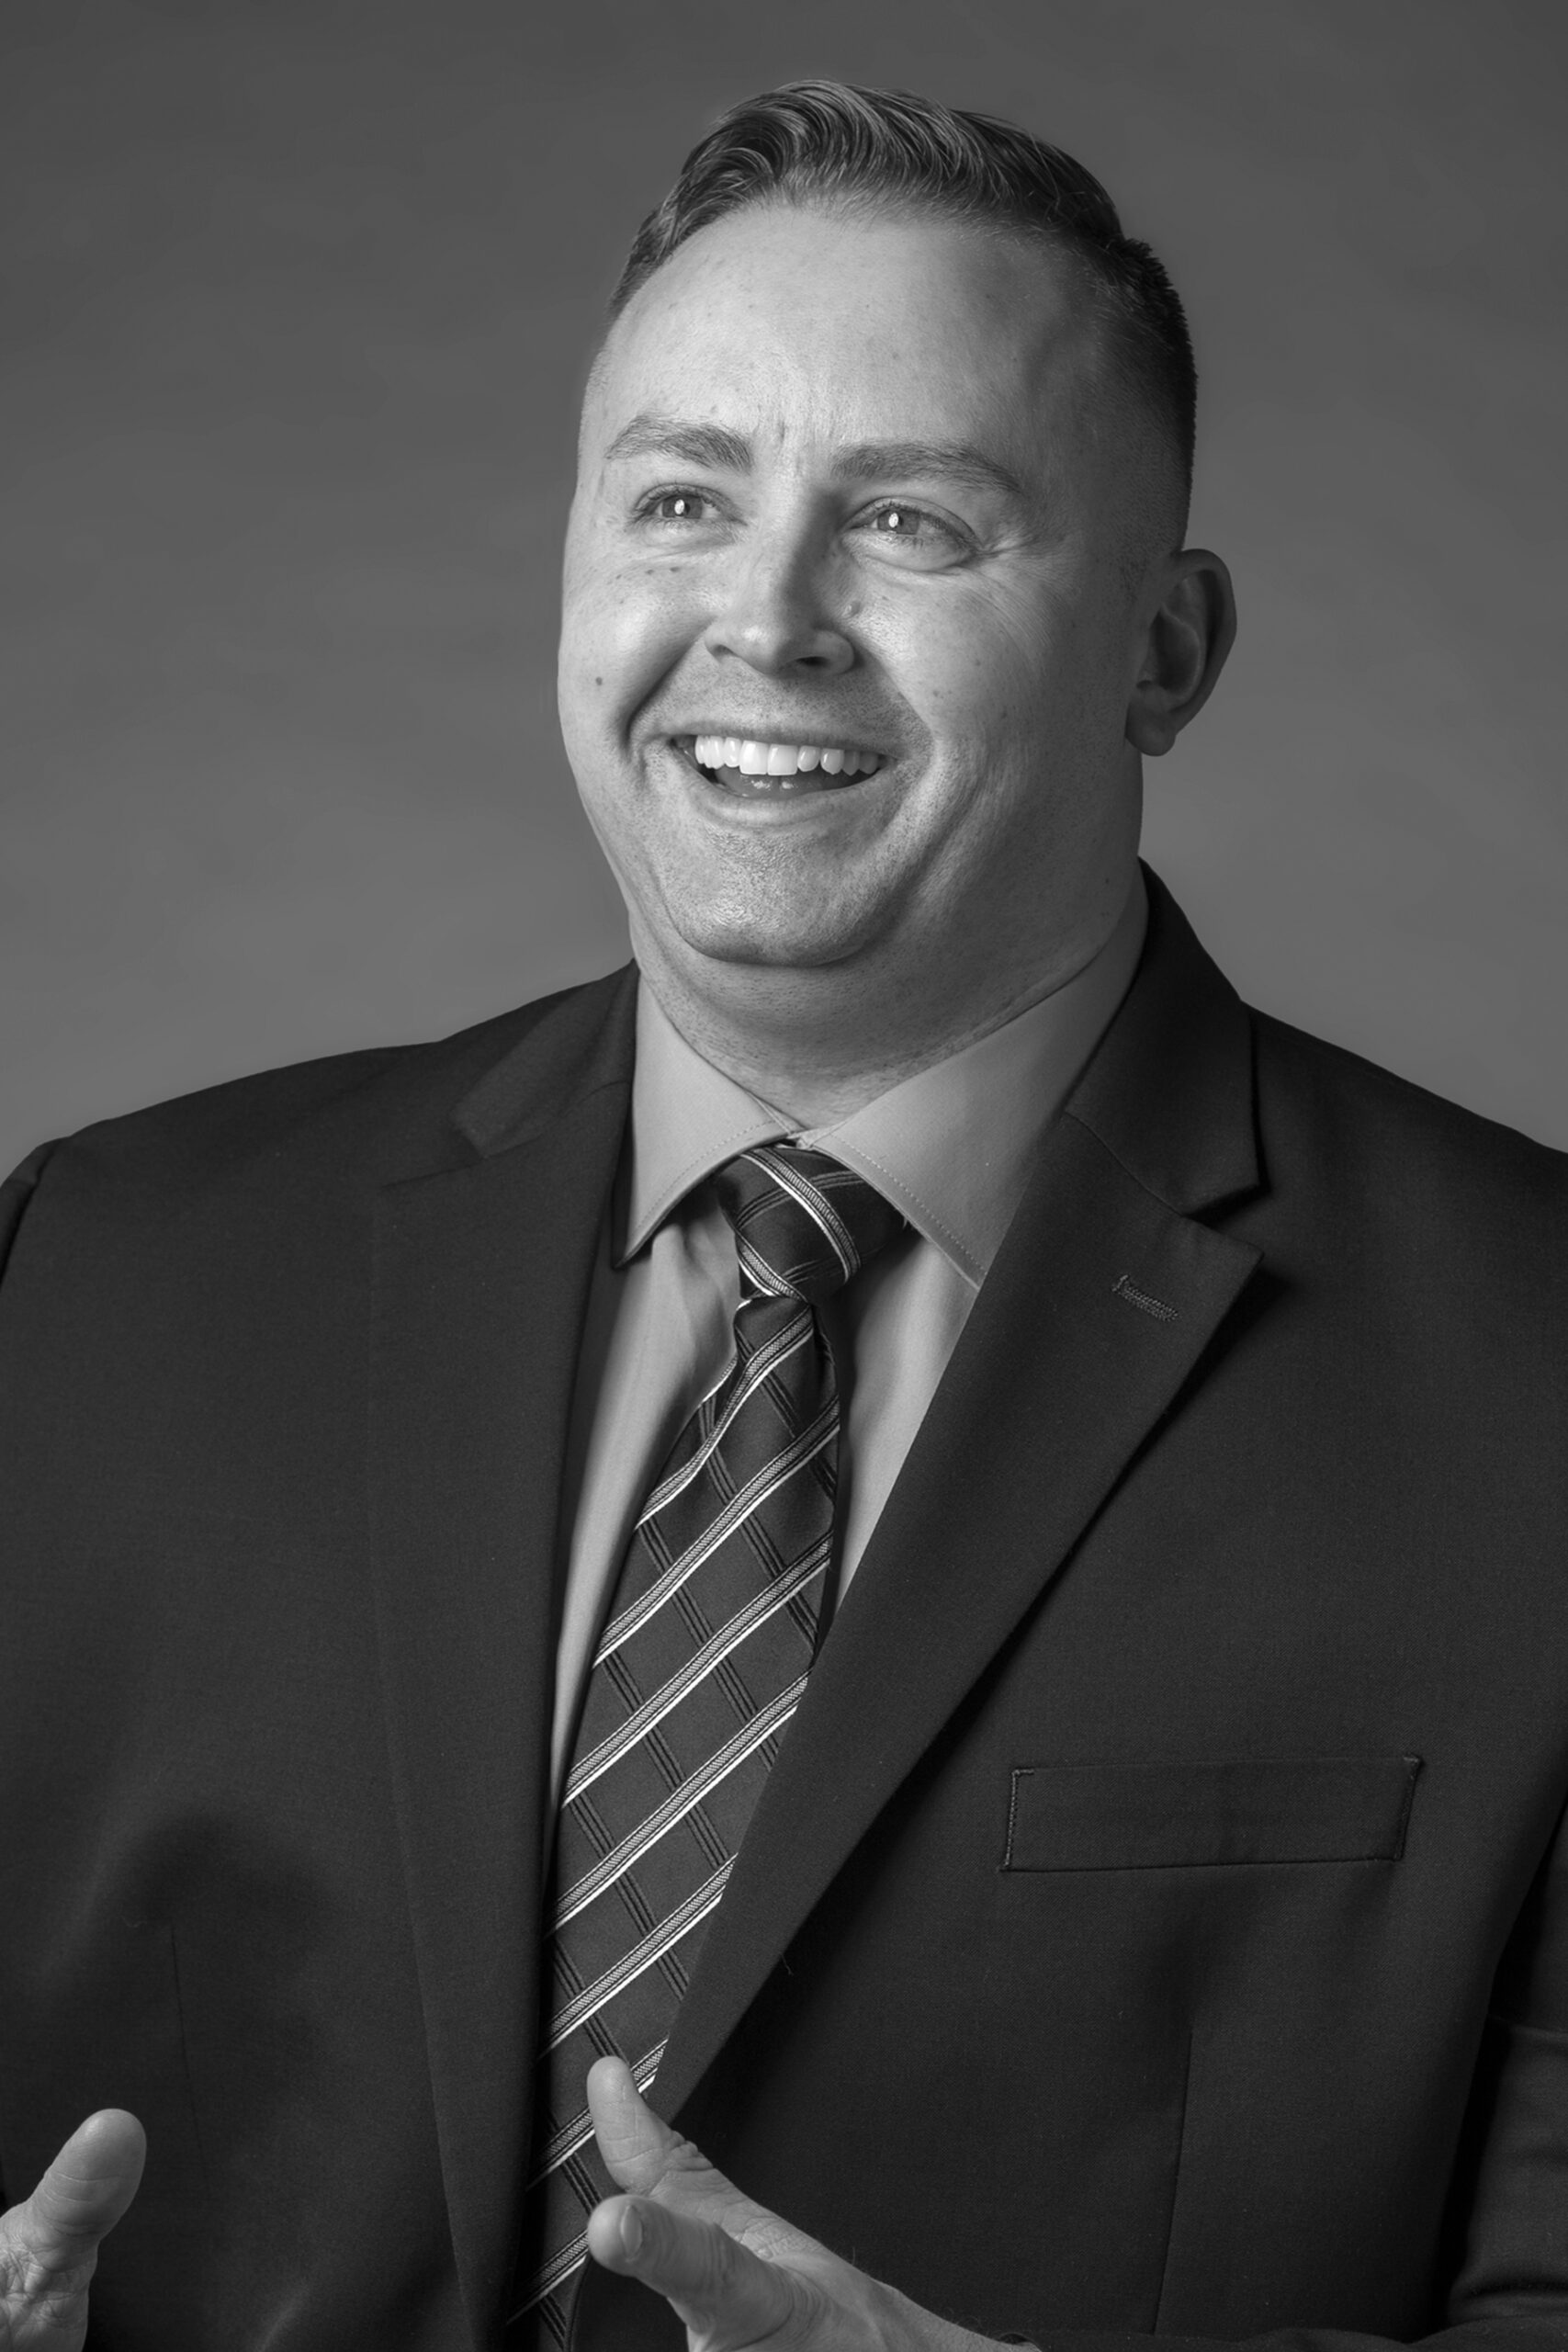 Black and white portrait of Volunteer Manager of Events, Mike McKenzie